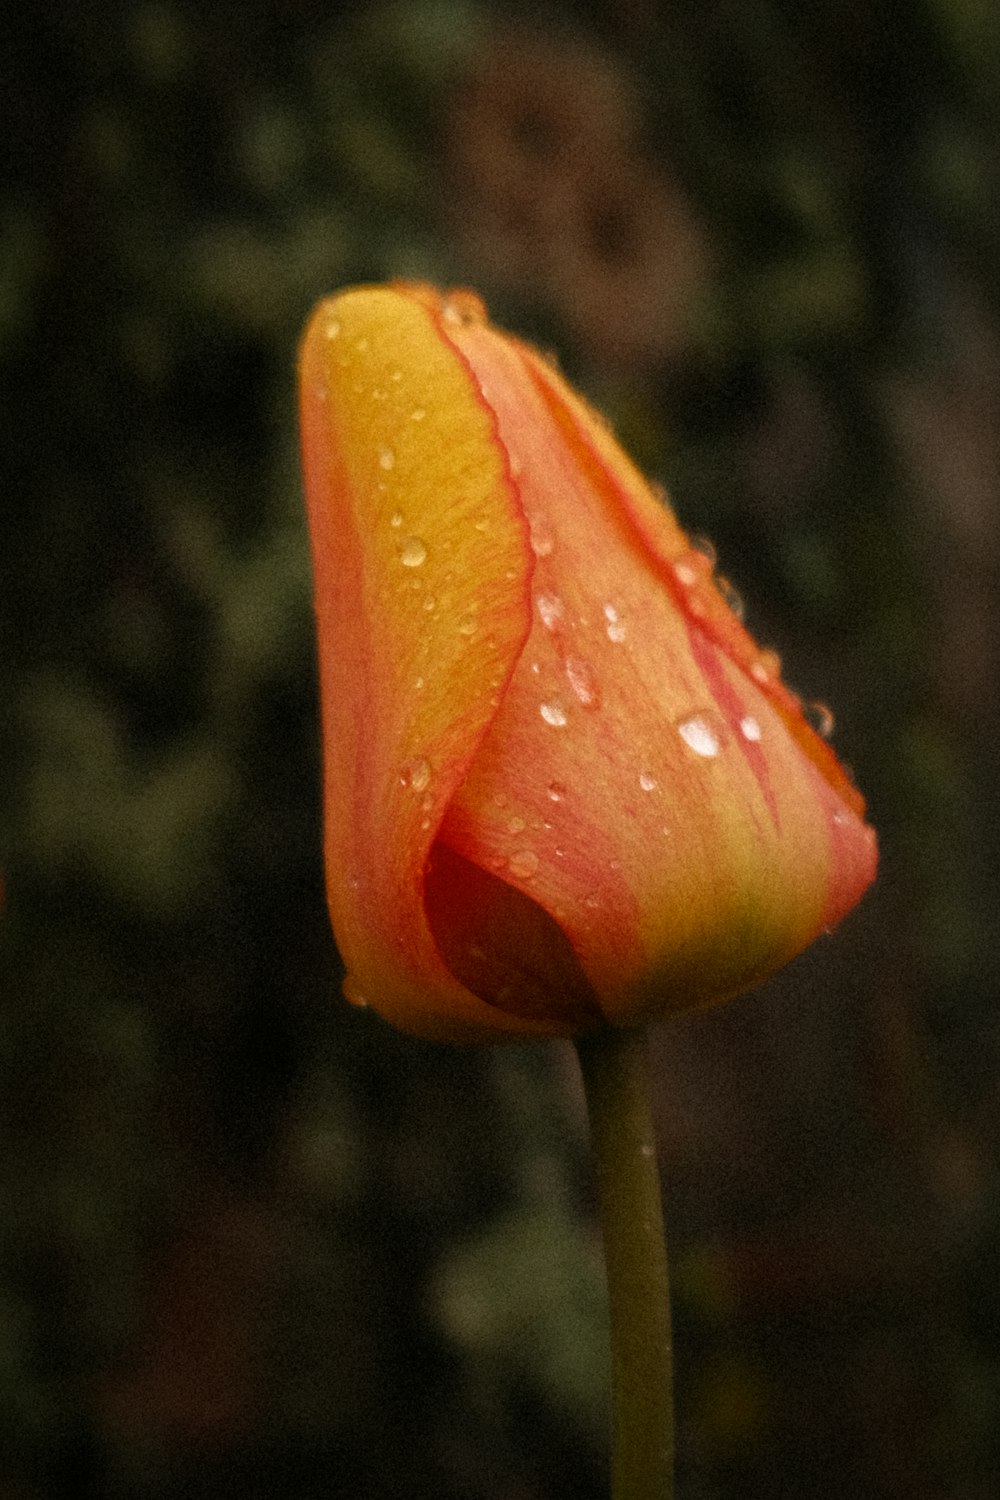 a single orange flower with water droplets on it